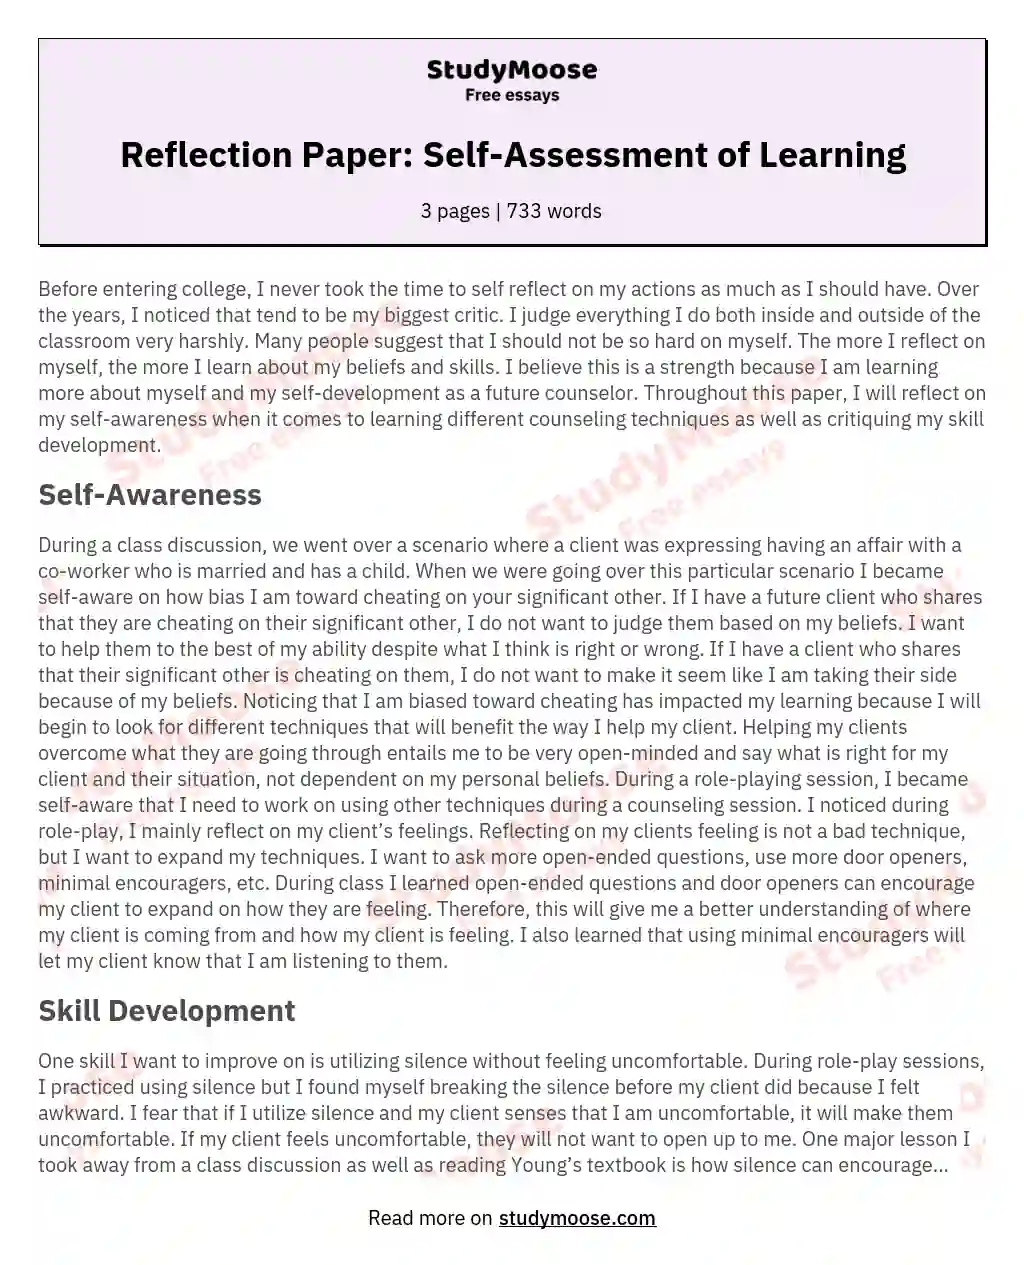 Reflection Paper: Self-Assessment of Learning essay